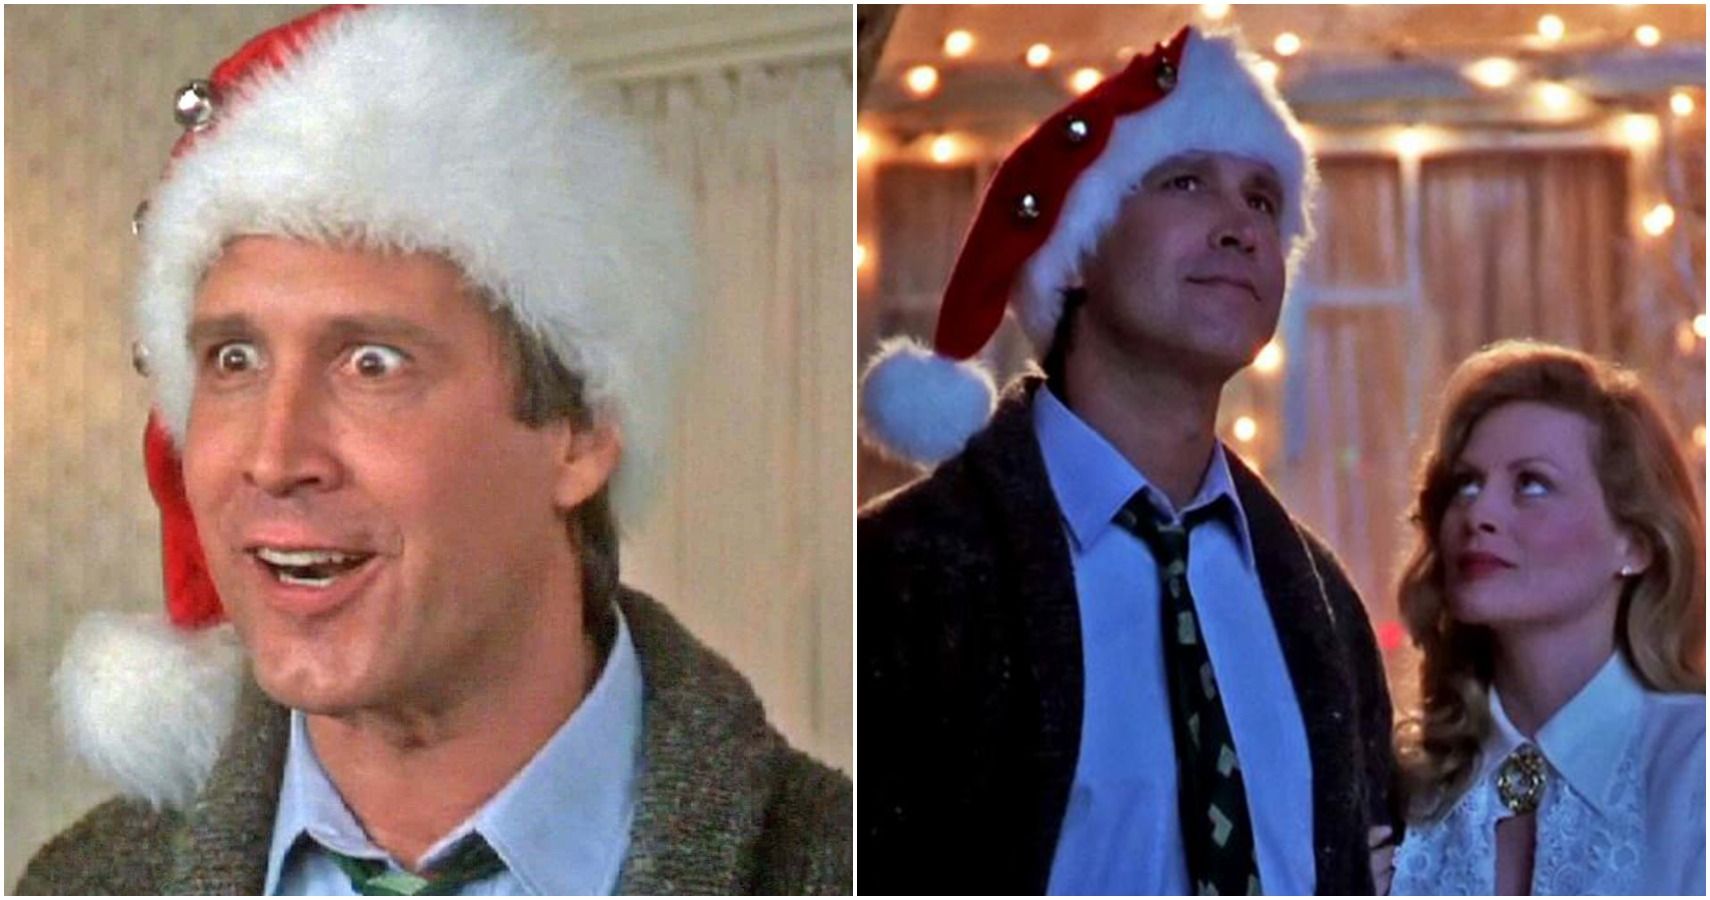 Christmas Vacation: 10 Funniest Scenes From The Holiday Film